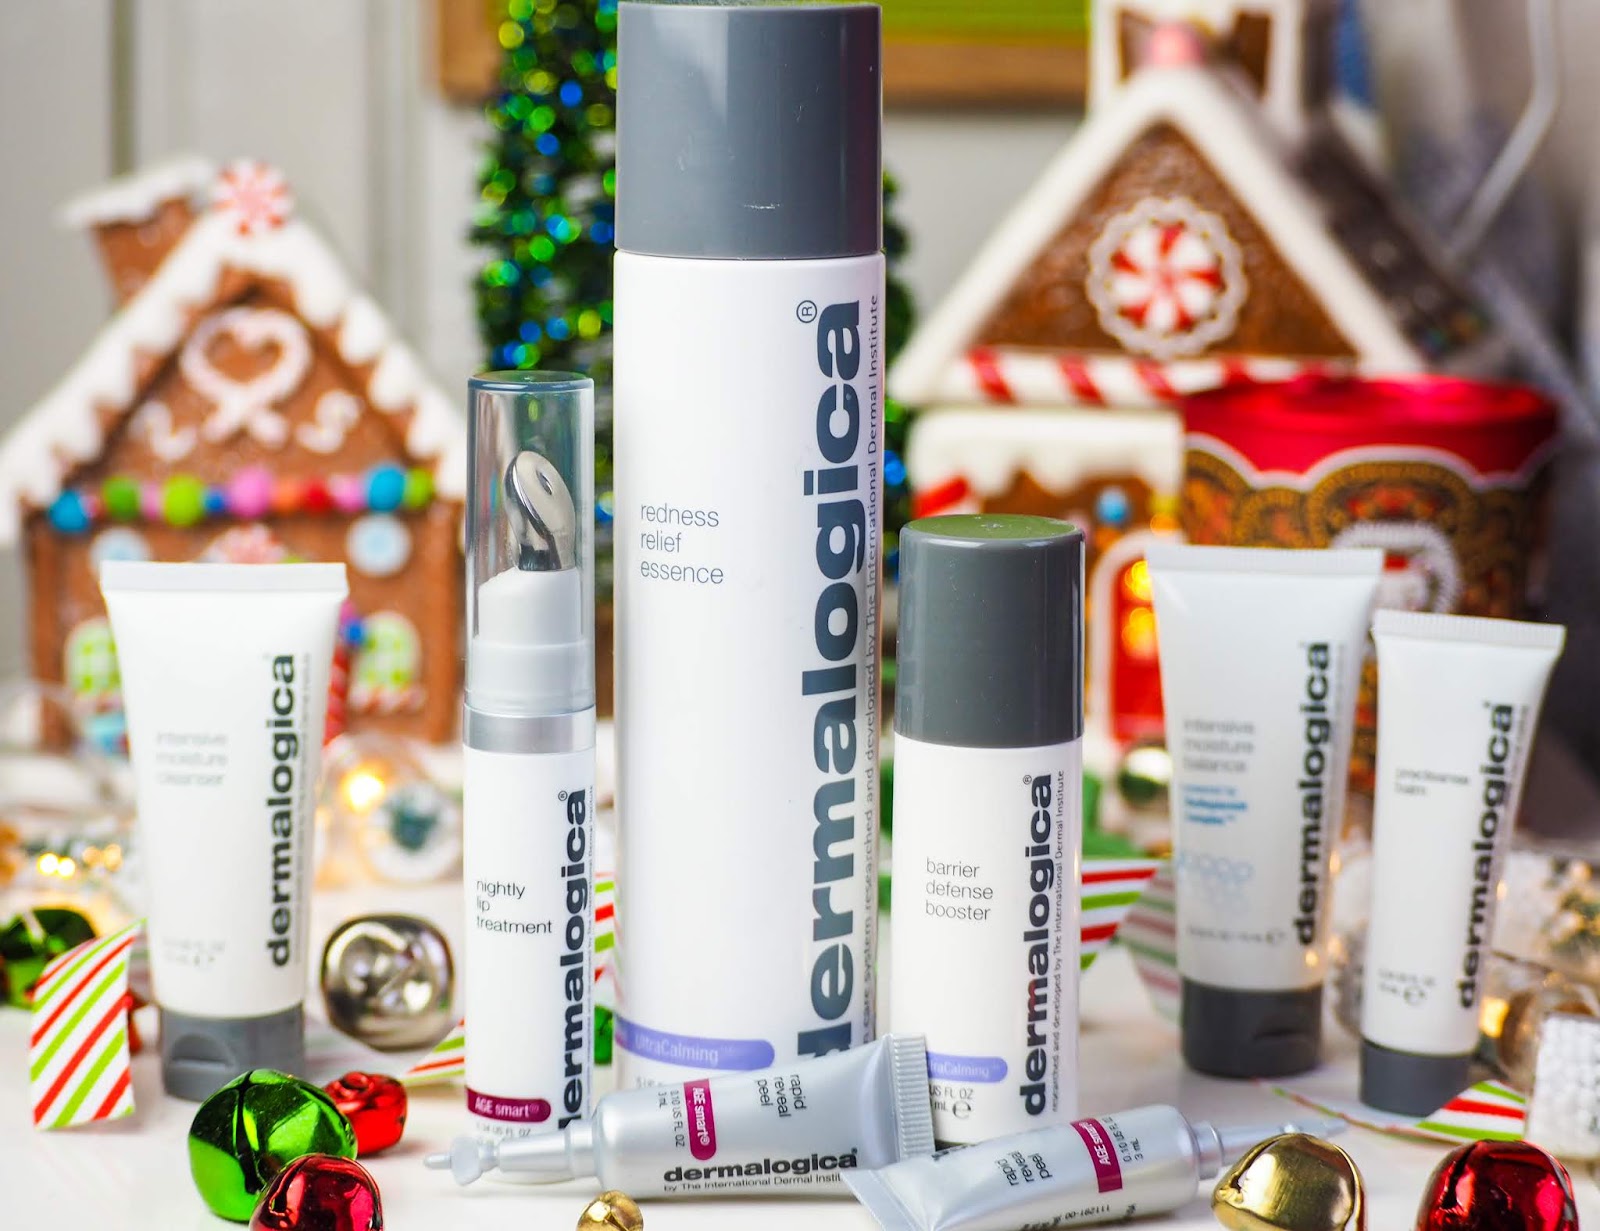 Christmas Gifting With Dermalogica*, Barrier Defense Booster*, Rapid Reveal Peel*, Nightly Lip Treatment*, Redness Relief Essence*, Precleanse Balm*, Intensive Moisture Cleanser*, Intensive Moisture Balance* Skin Smoothing Cream*, Daily Microfoliant*, Special Cleansing Gel* Review